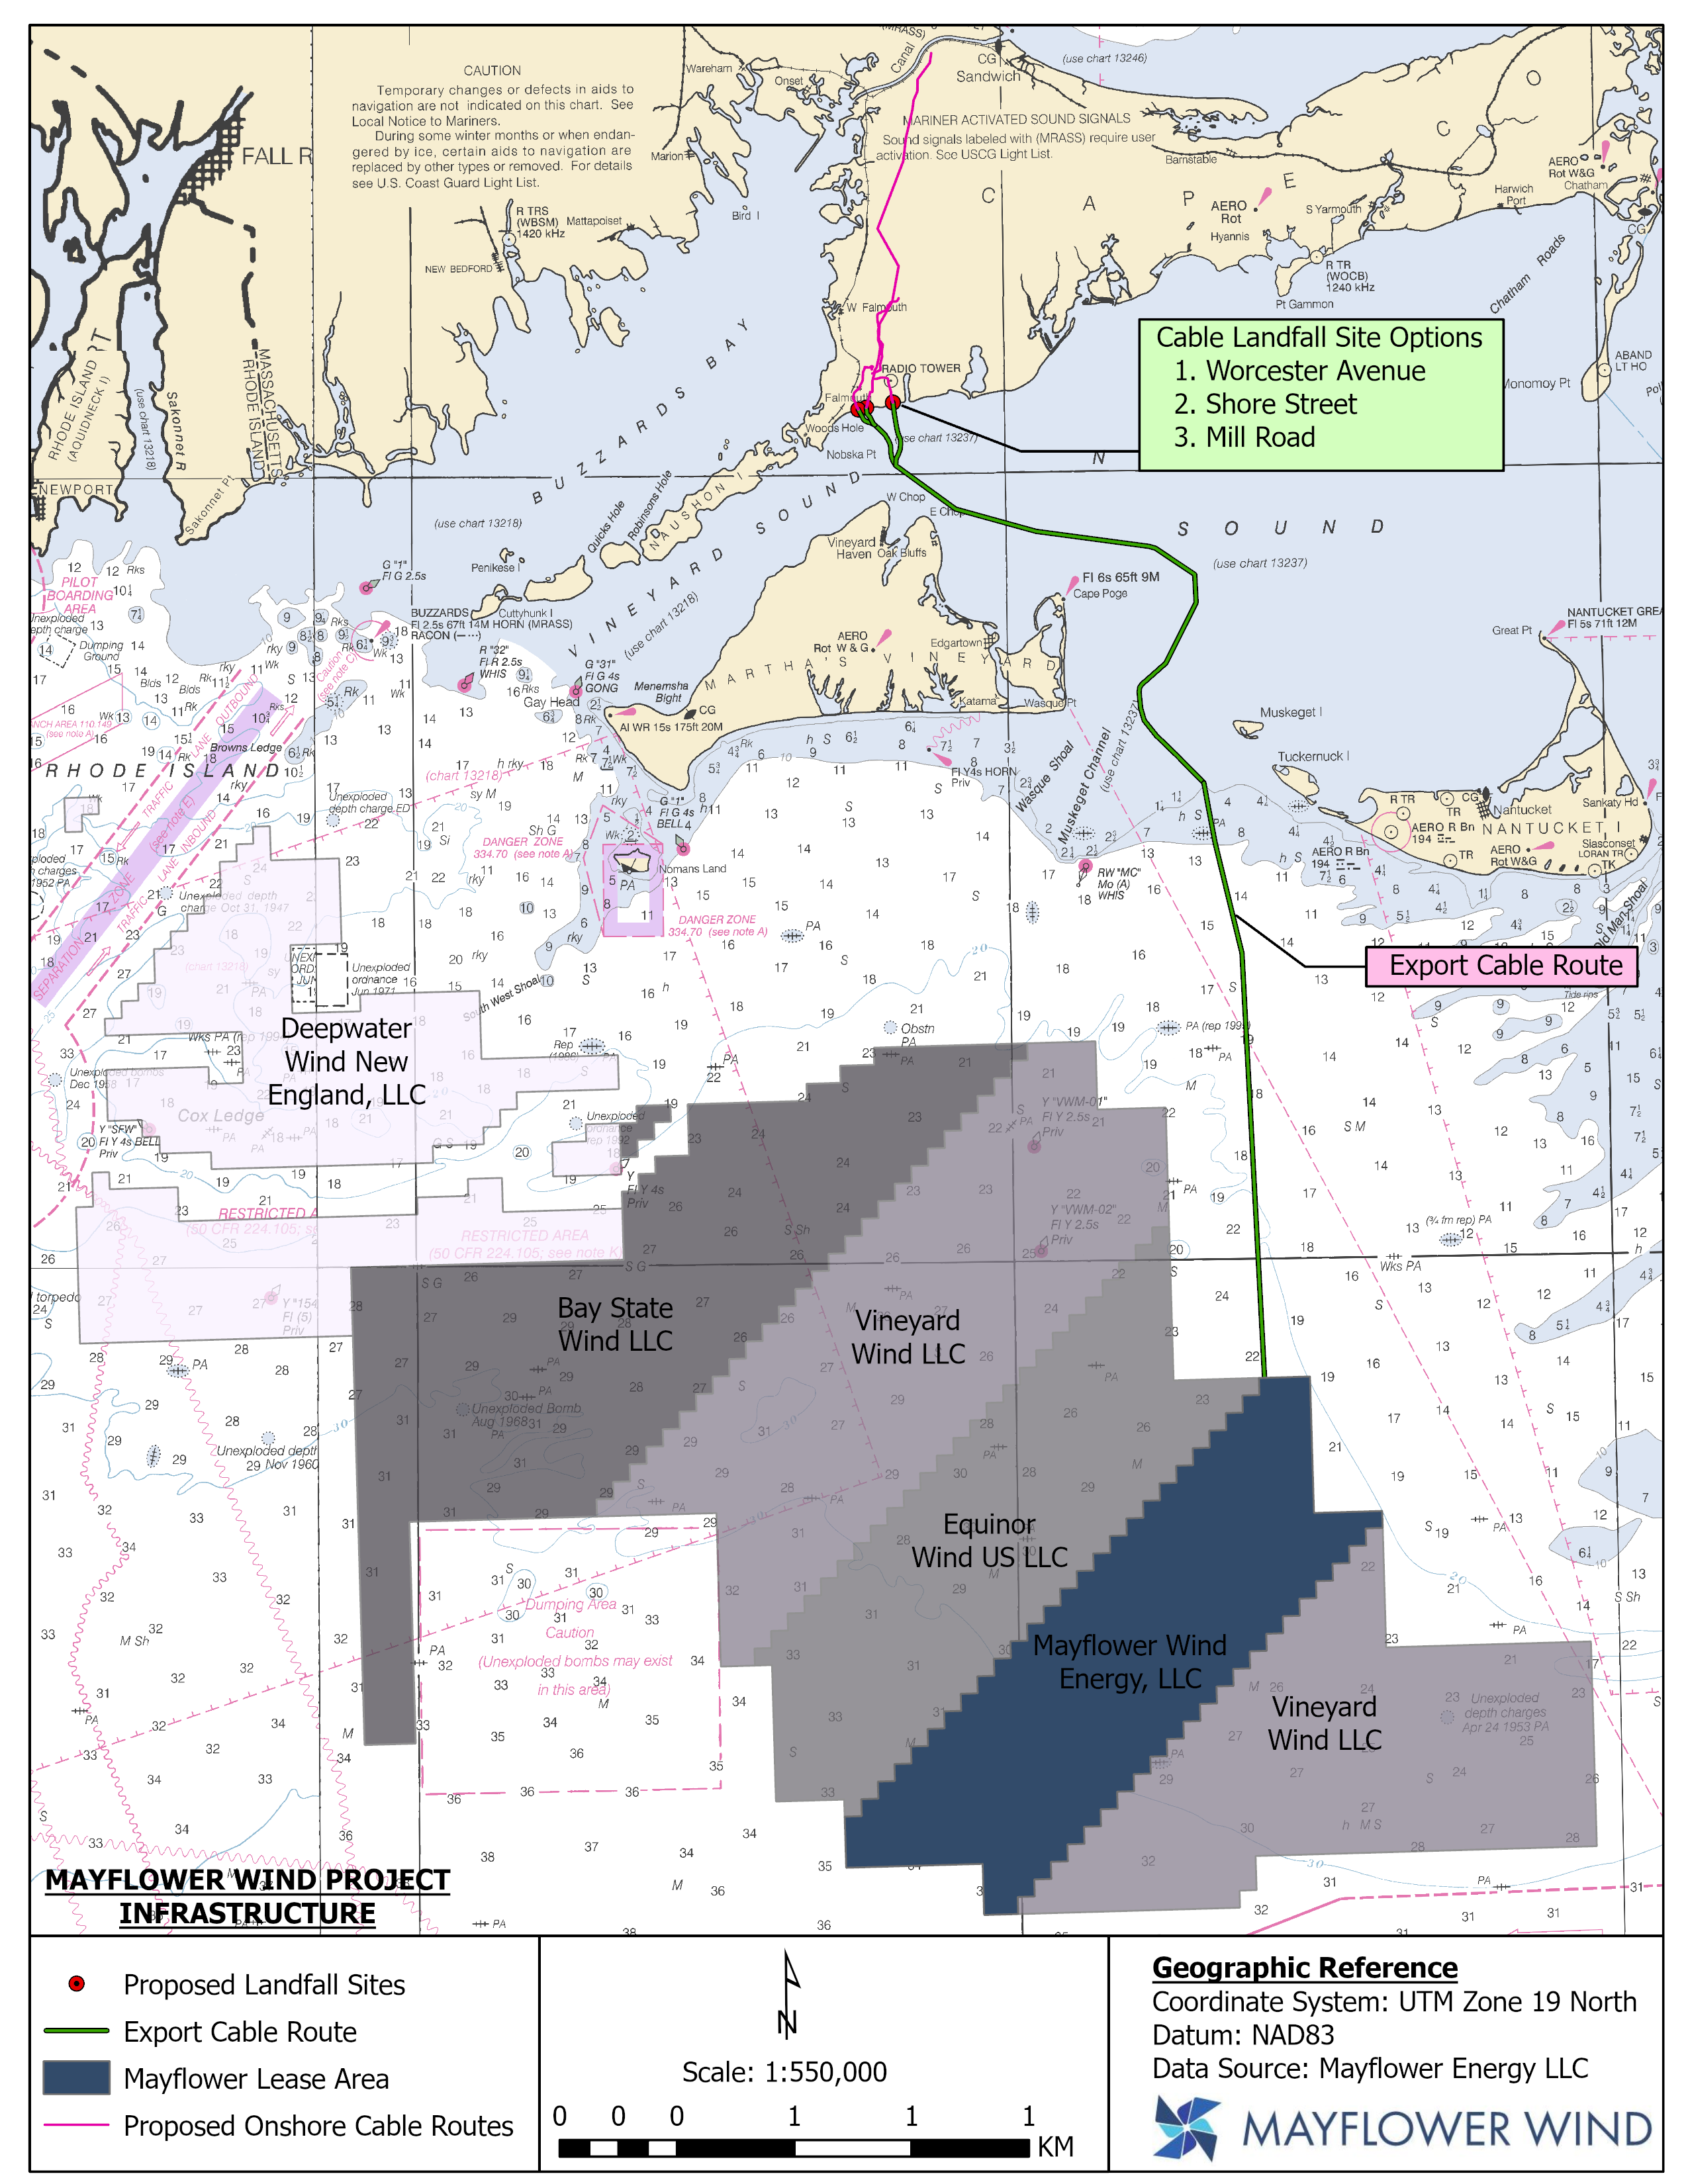 Burns & McDonnell Wins Mayflower Wind Onshore Link FEED Contract